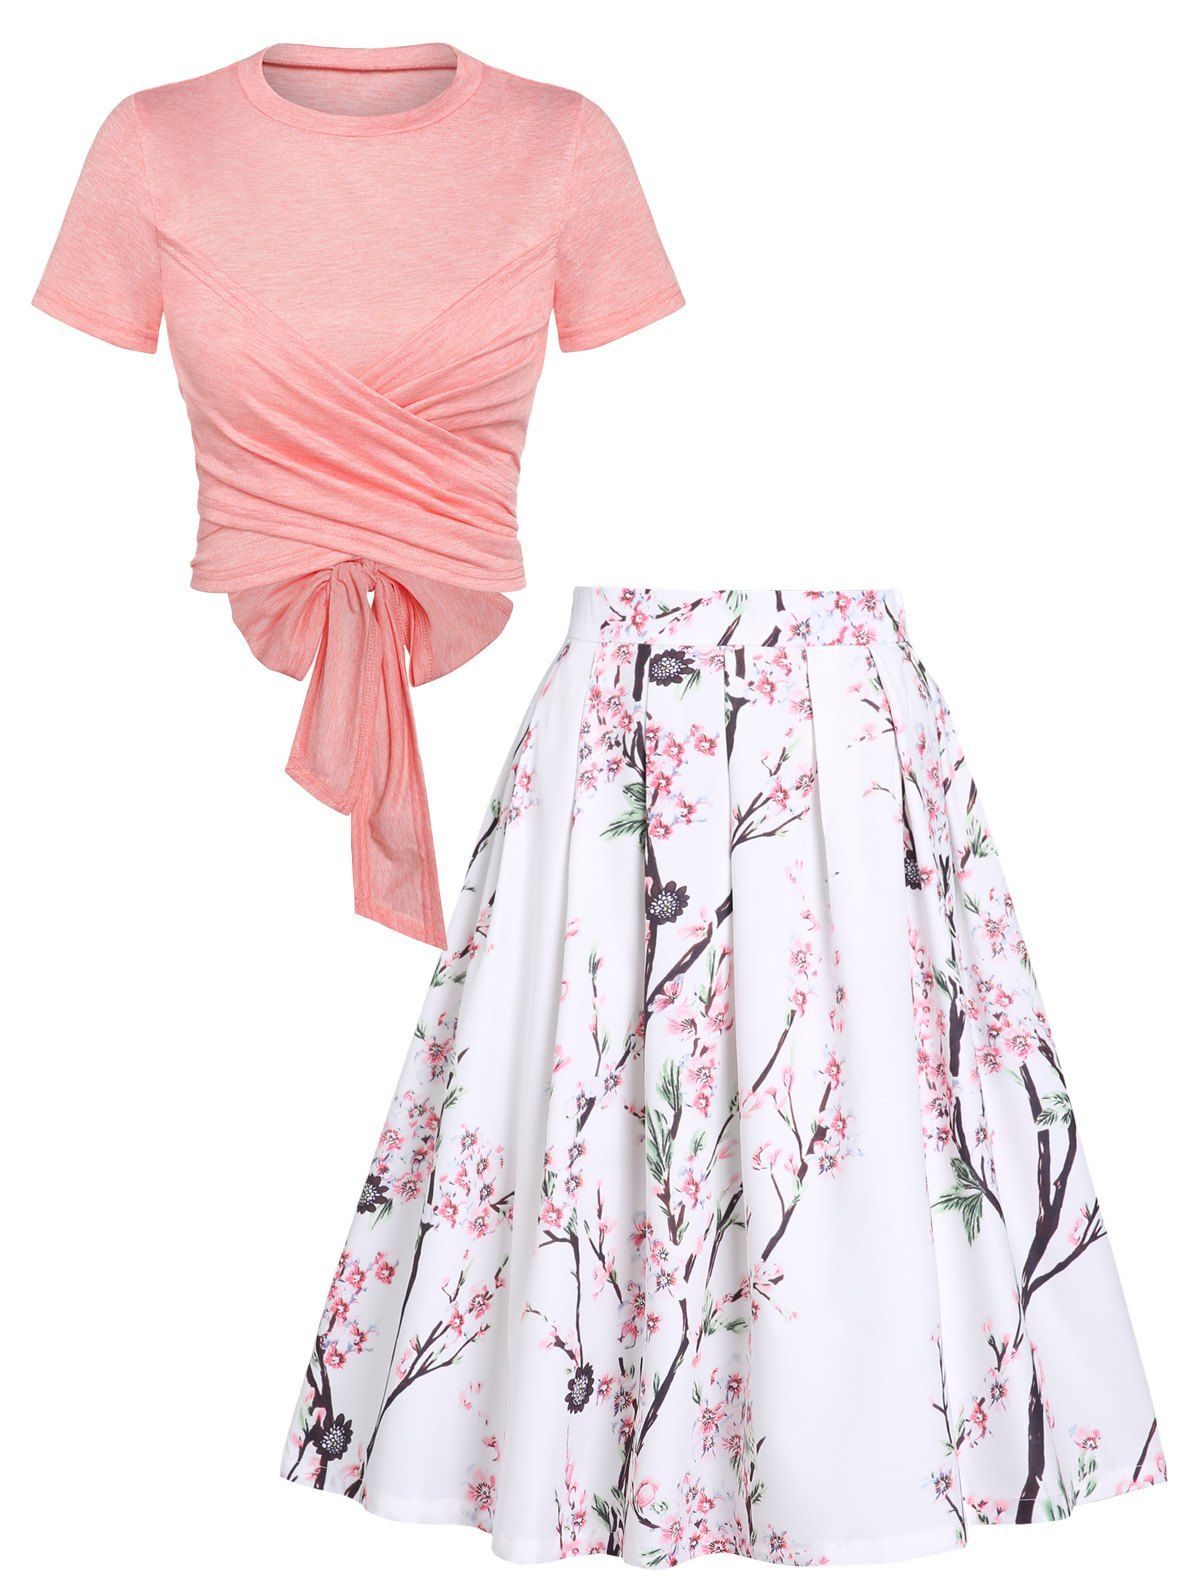 Dresslily Cross Wrap Bowknot Heathered Top and Butterfly Rose Flower Pleated Skirt Outfit